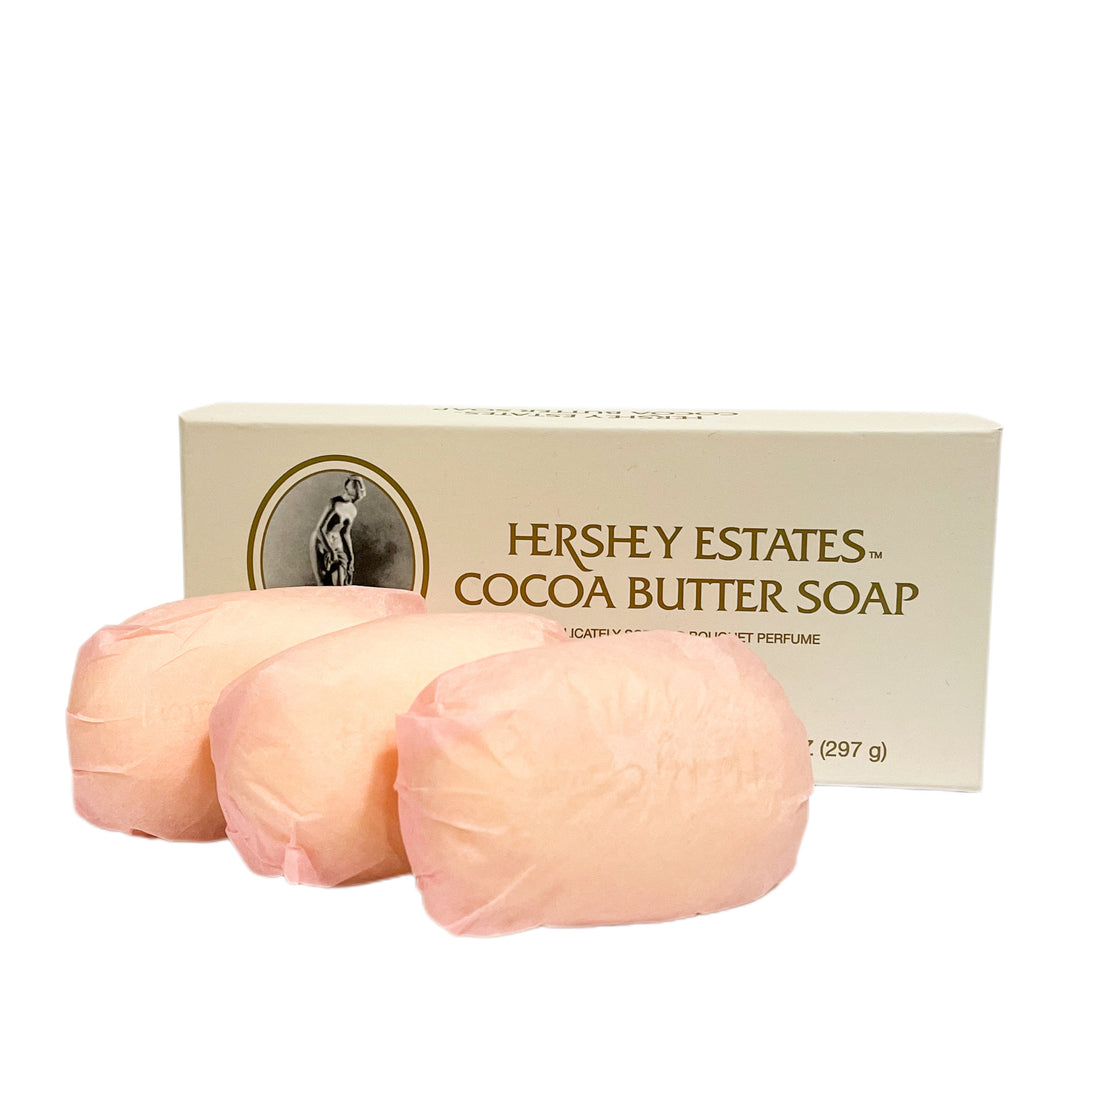 Hershey Estates Cocoa Butter Soap